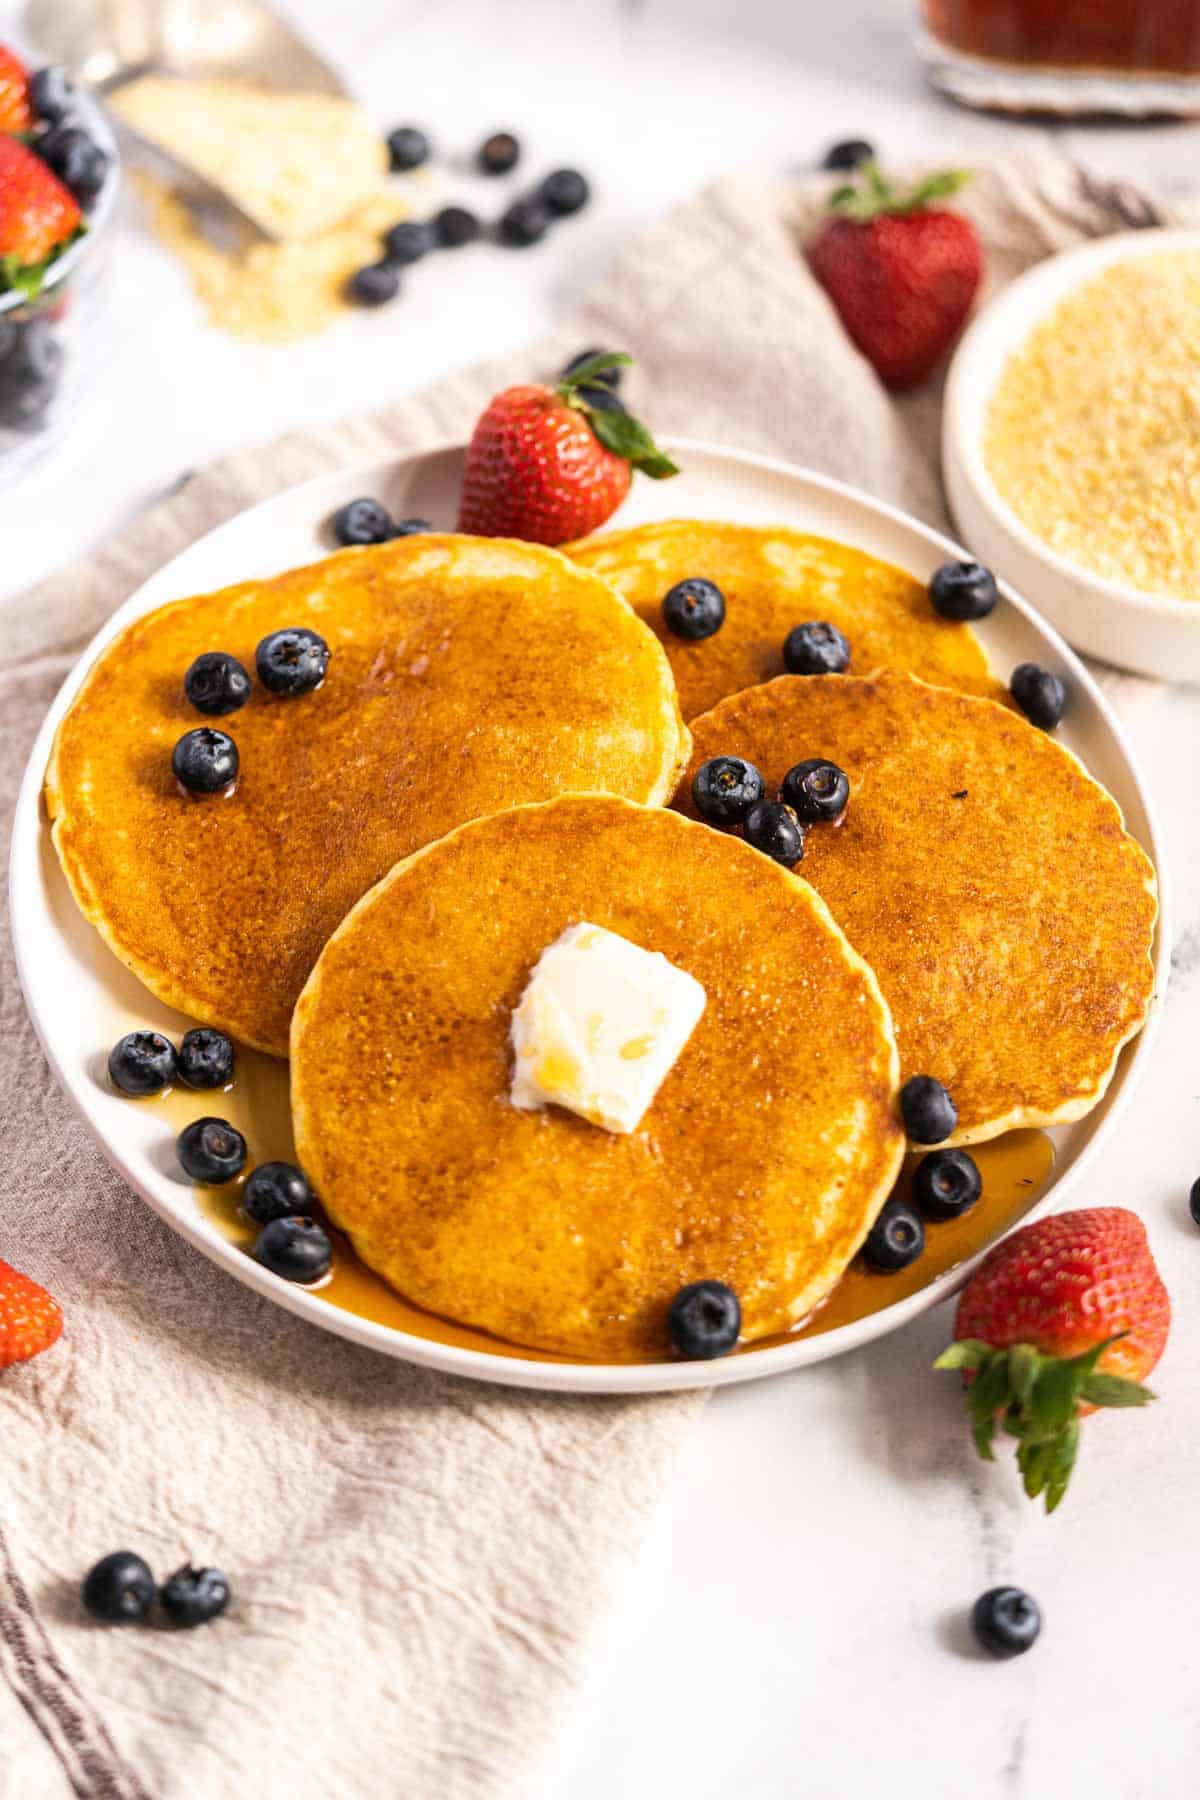 Plate with pancakes and fruit.